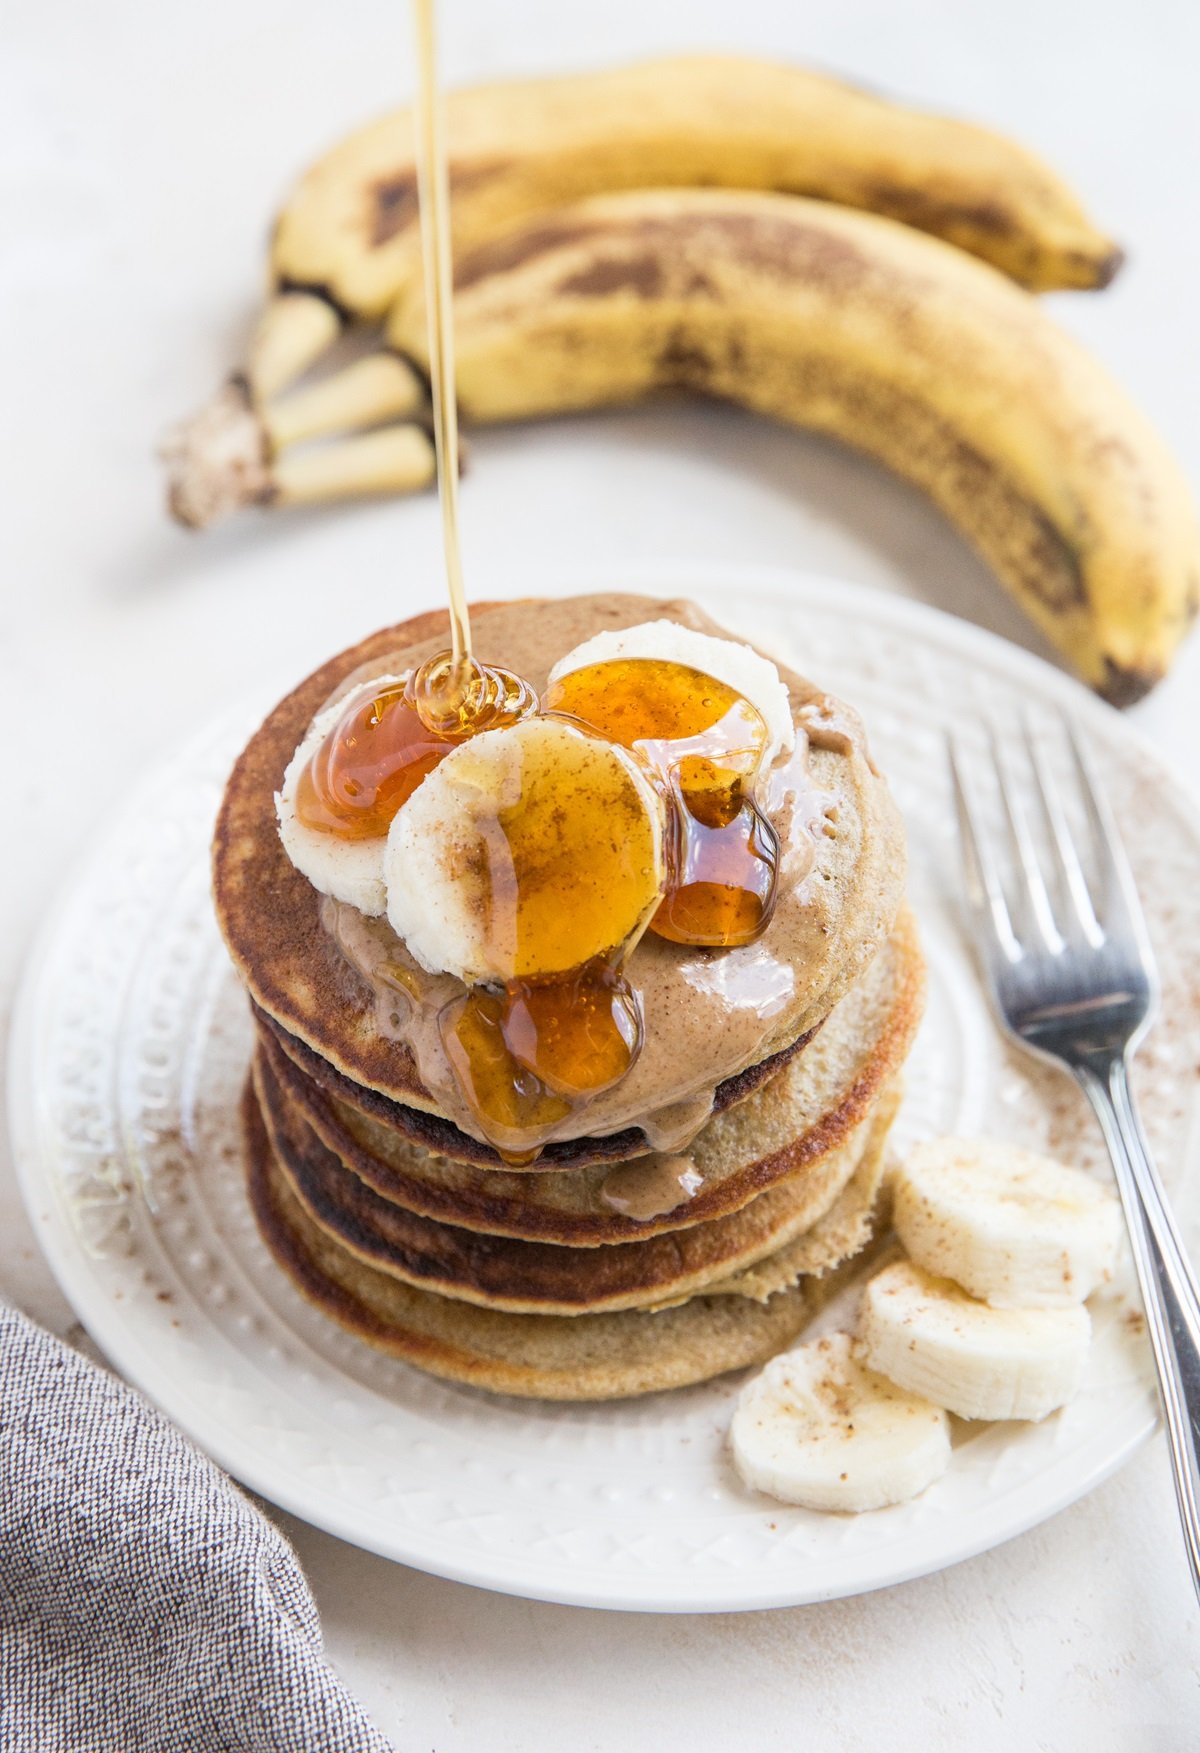 Blender Banana Pancakes made with quick oats for a flourless, gluten-free, dairy-free pancake recipe